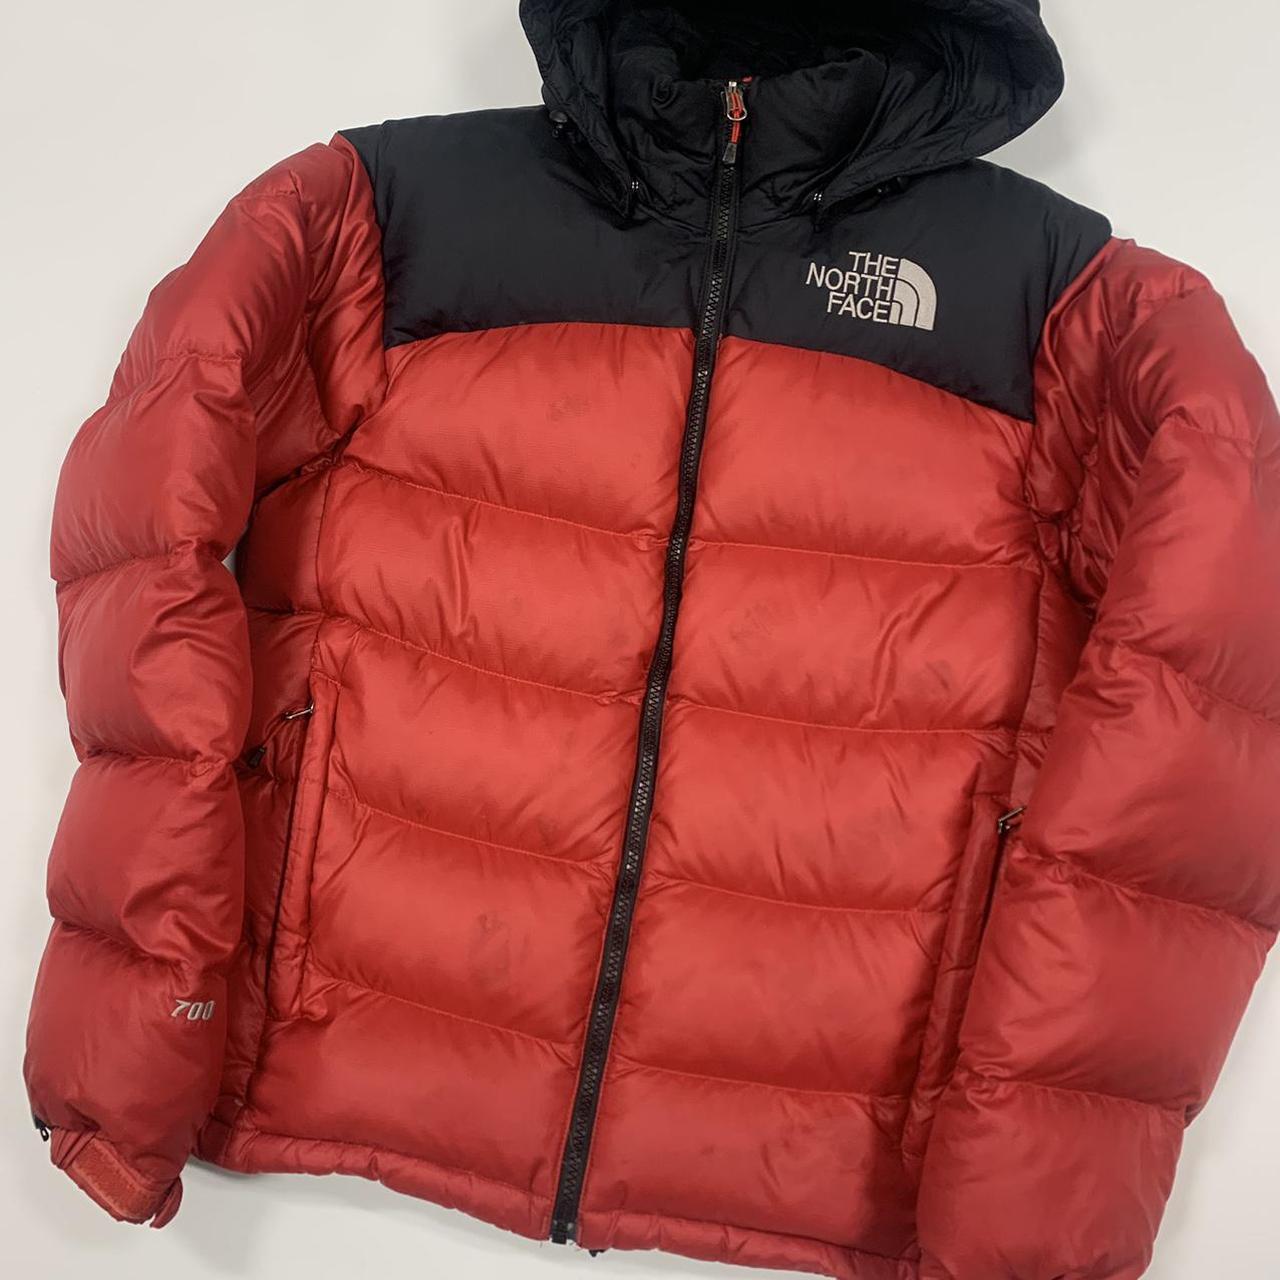 Product Image 2 - The North Face Nuptse 700